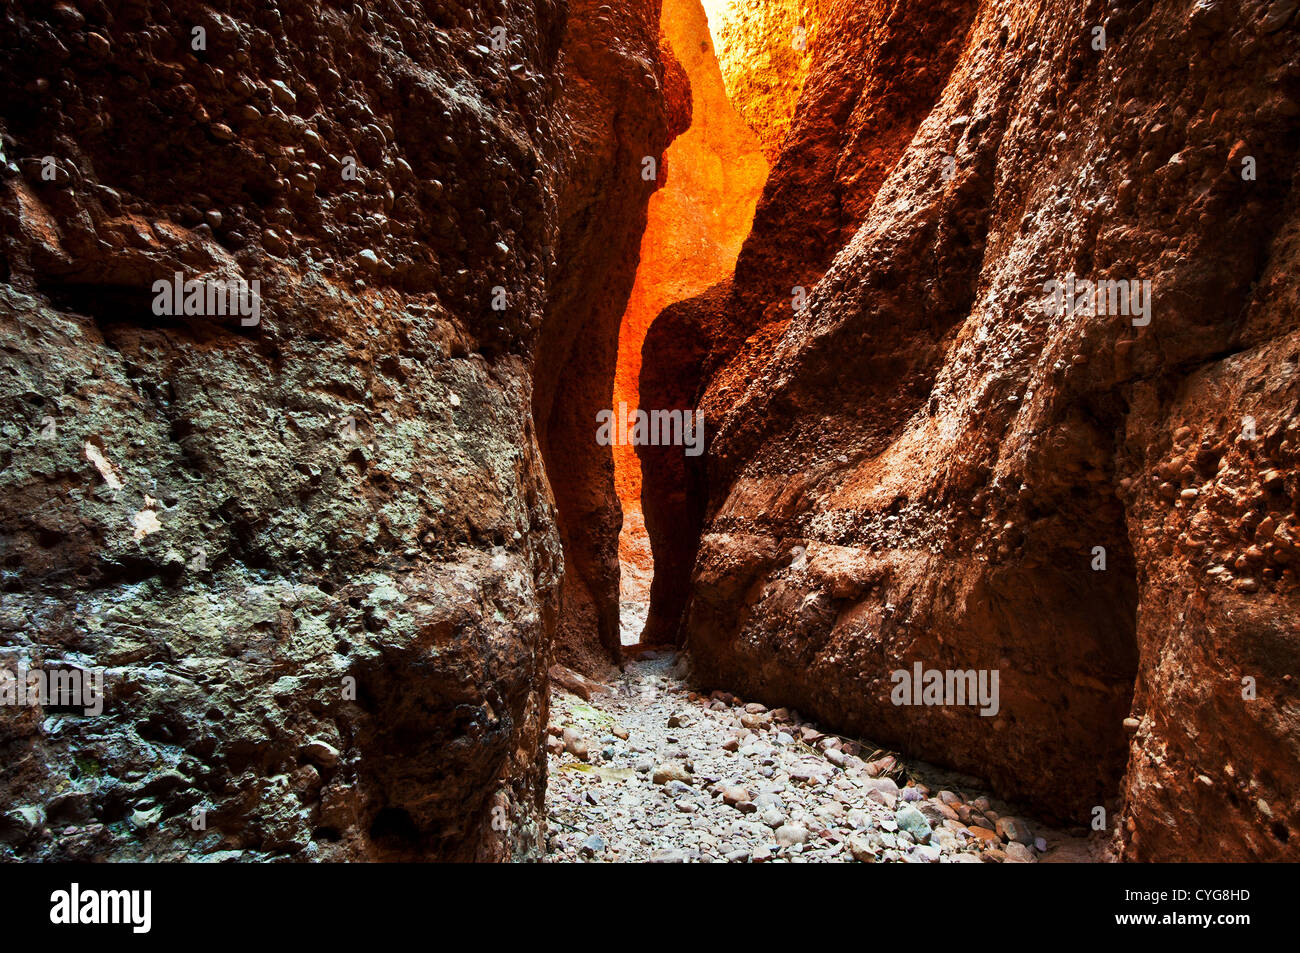 Glowing rocks in famous Echidna Chasm. Stock Photo